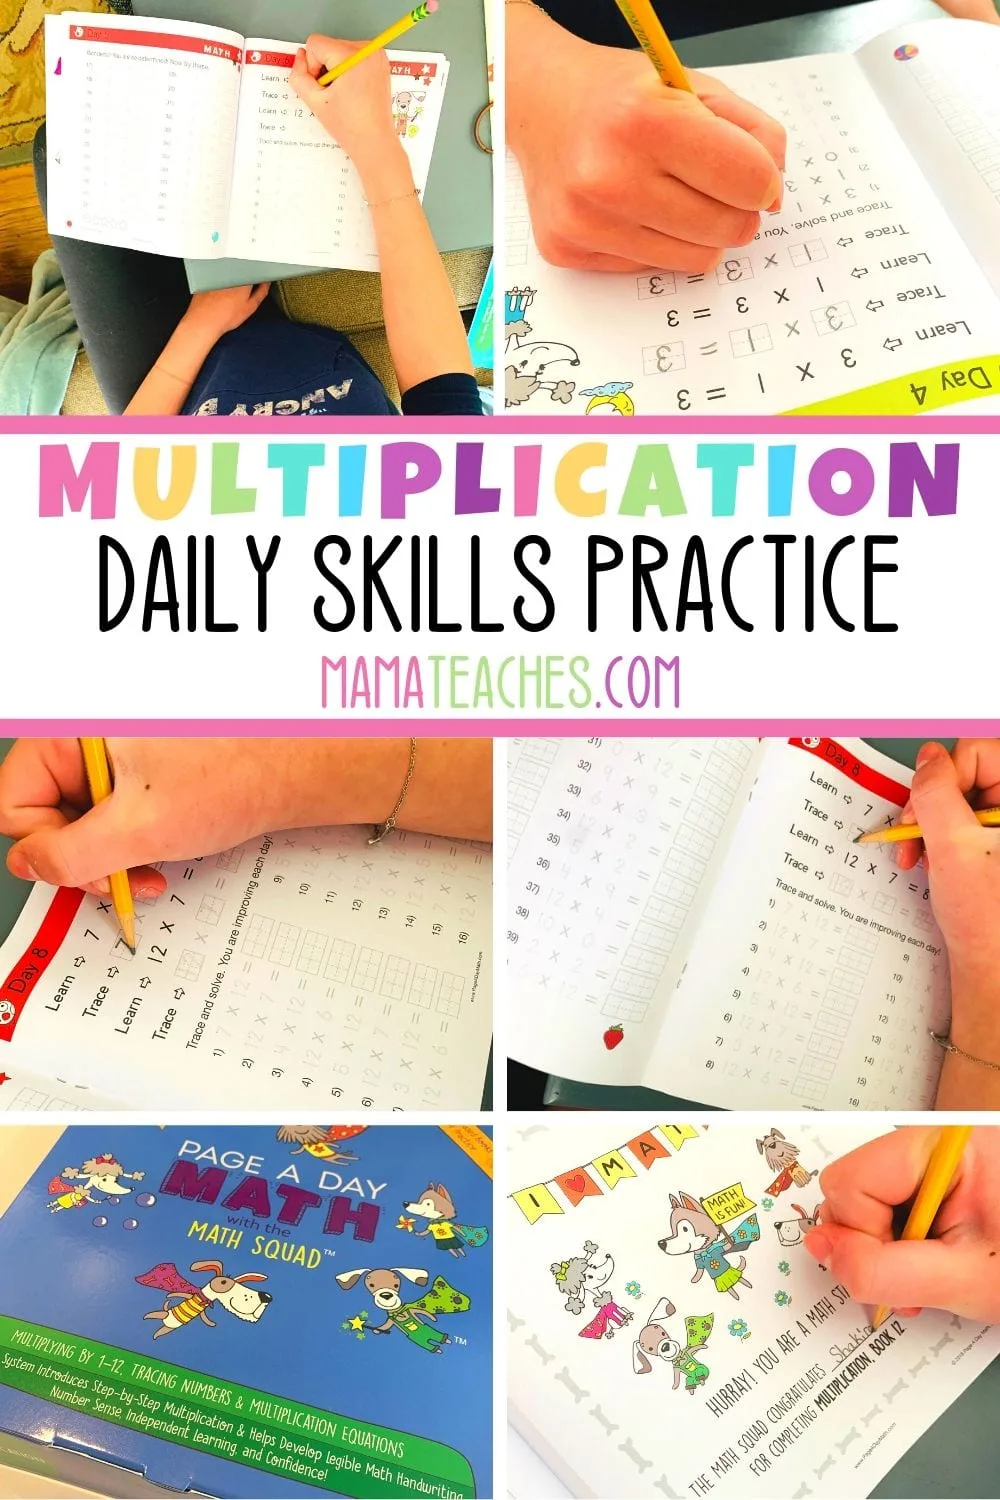 Multiplication Daily Skills Practice